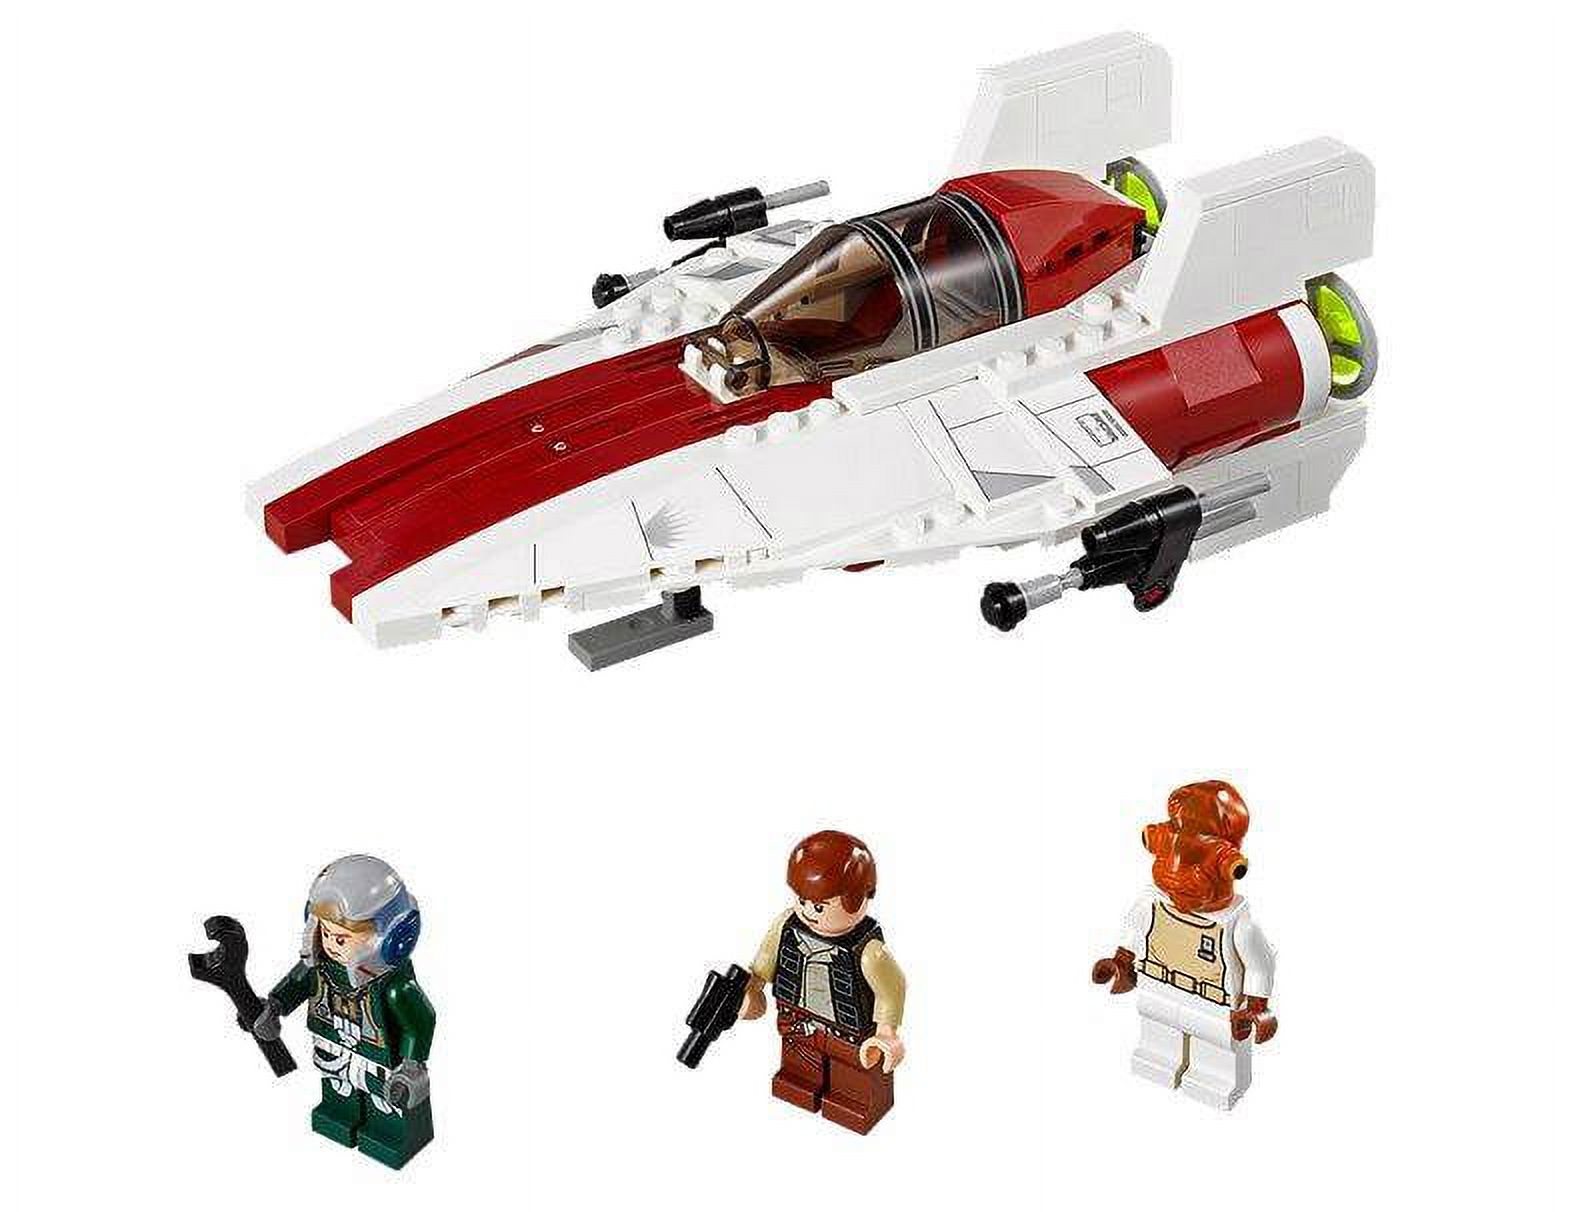 LEGO Star Wars A-wing Starfighter Play Set - image 1 of 7